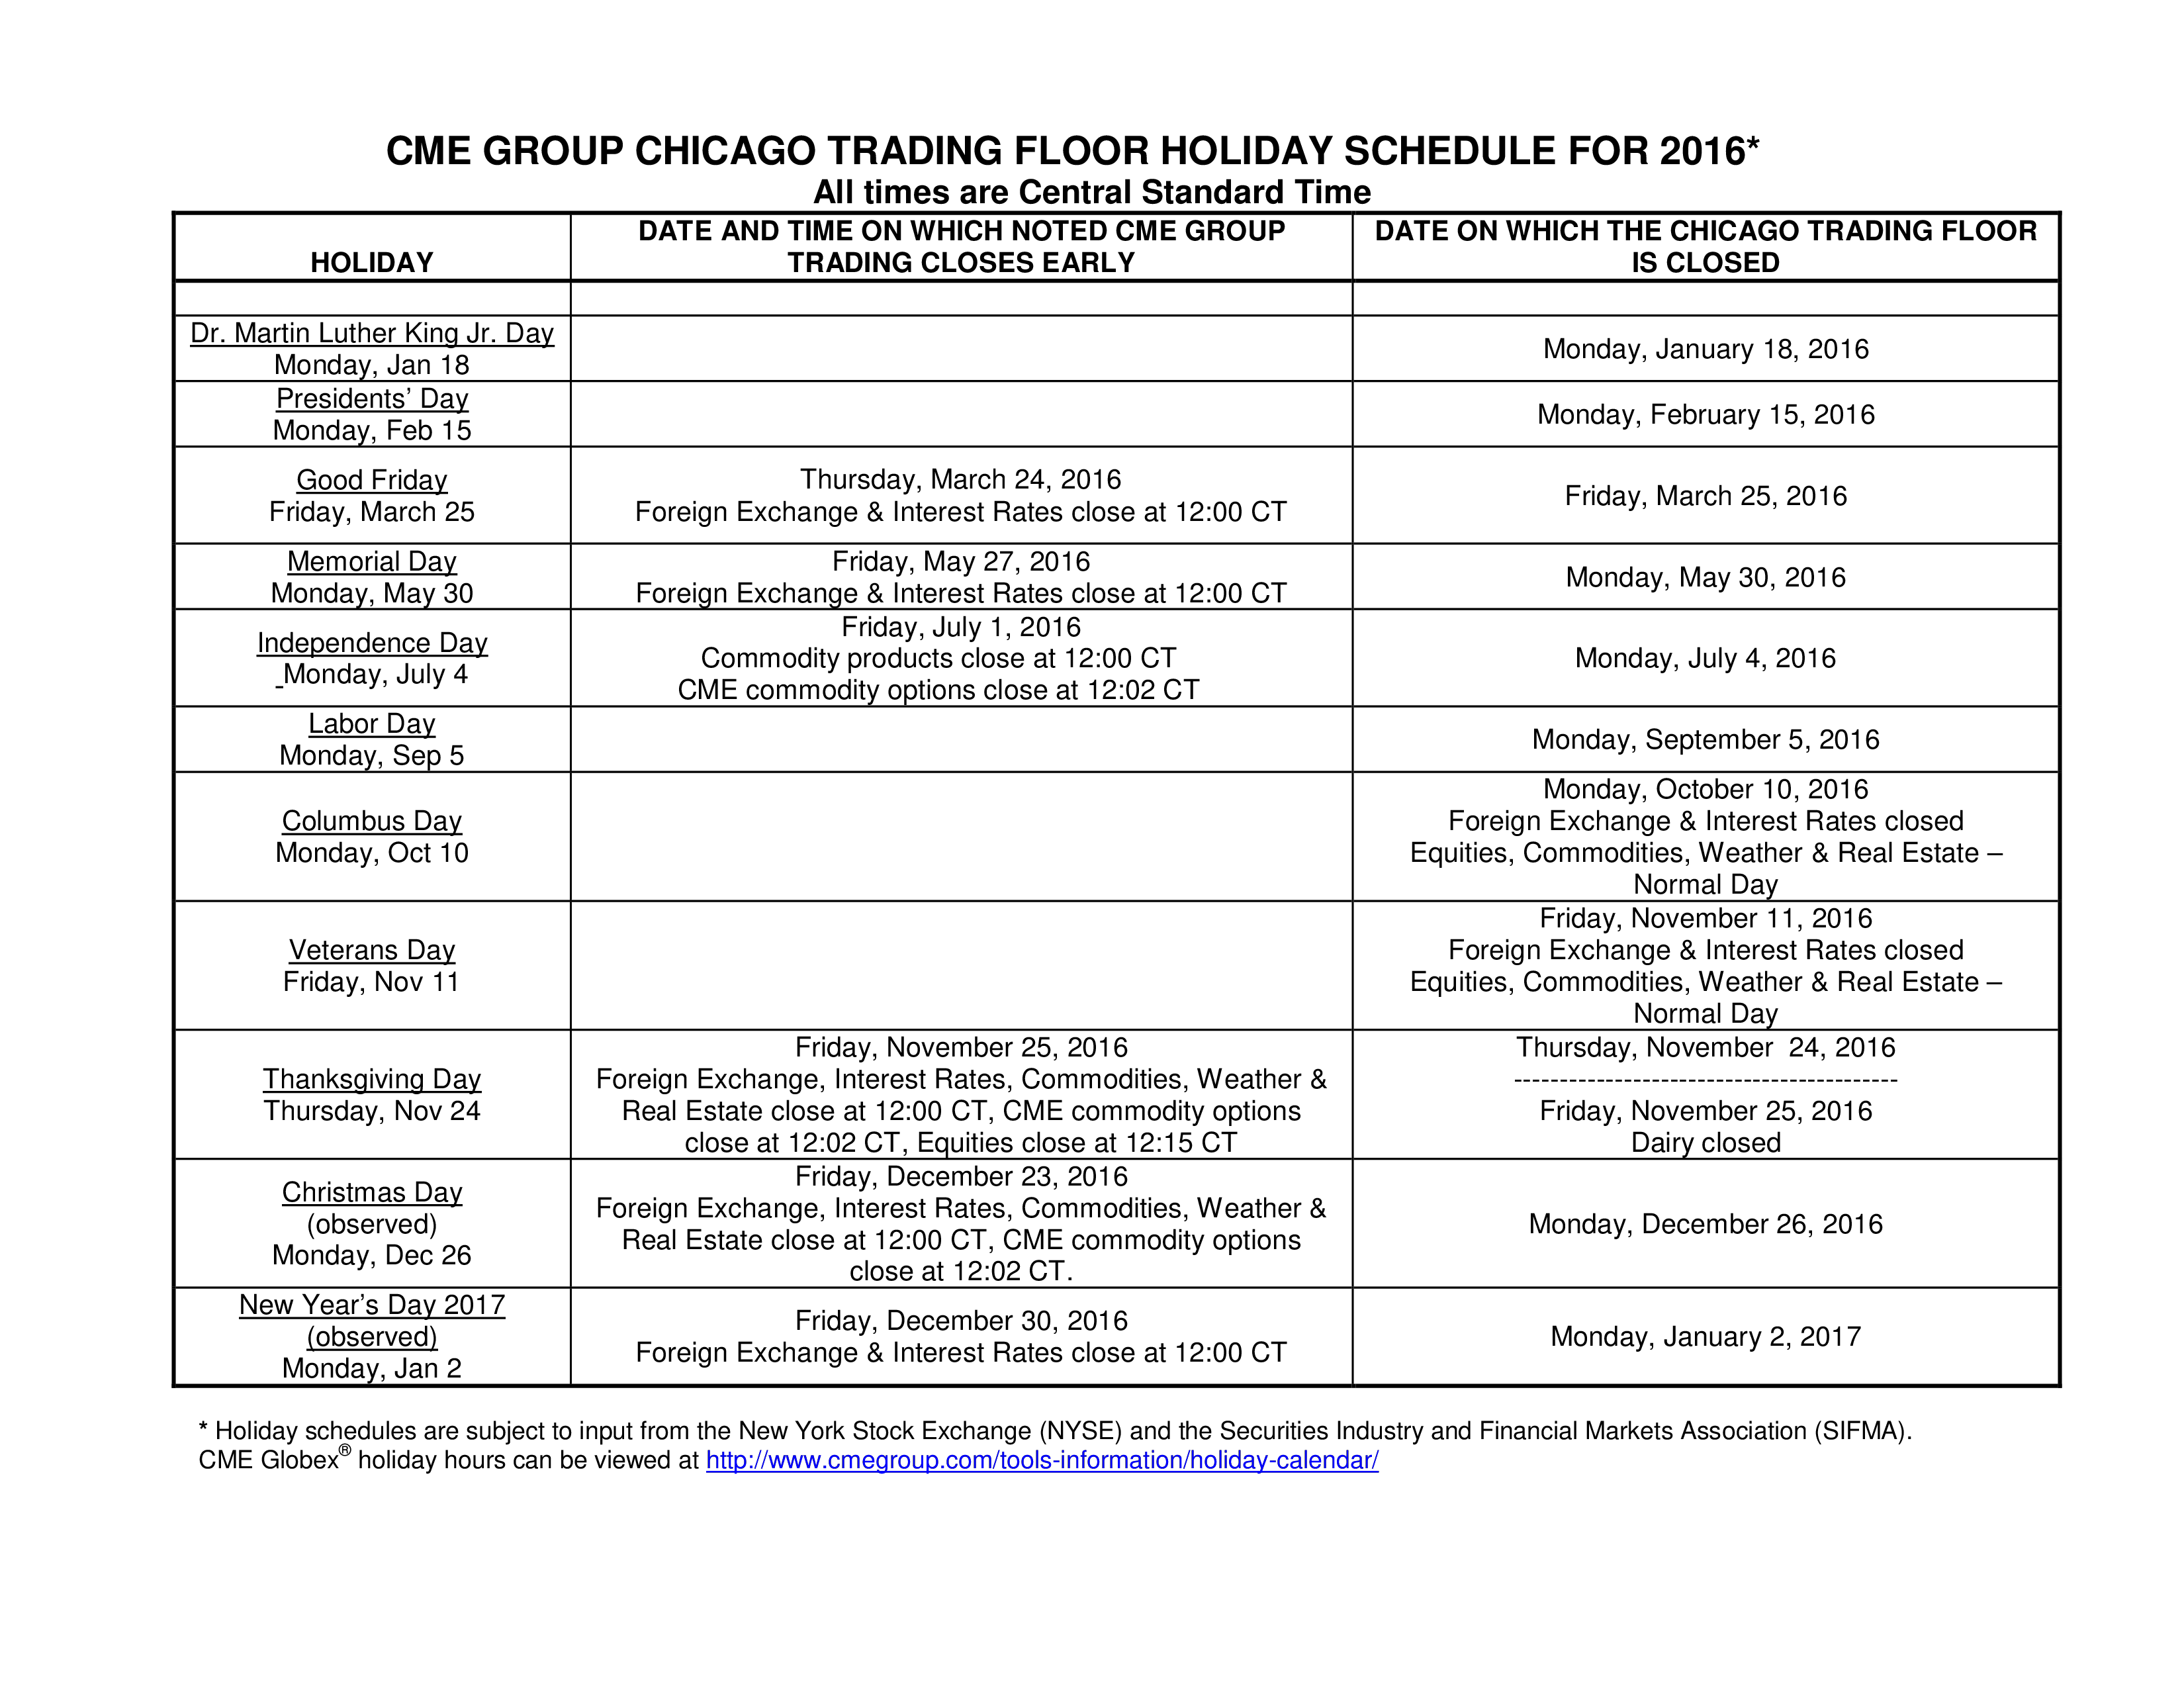 Trading Floor Holiday Schedule main image